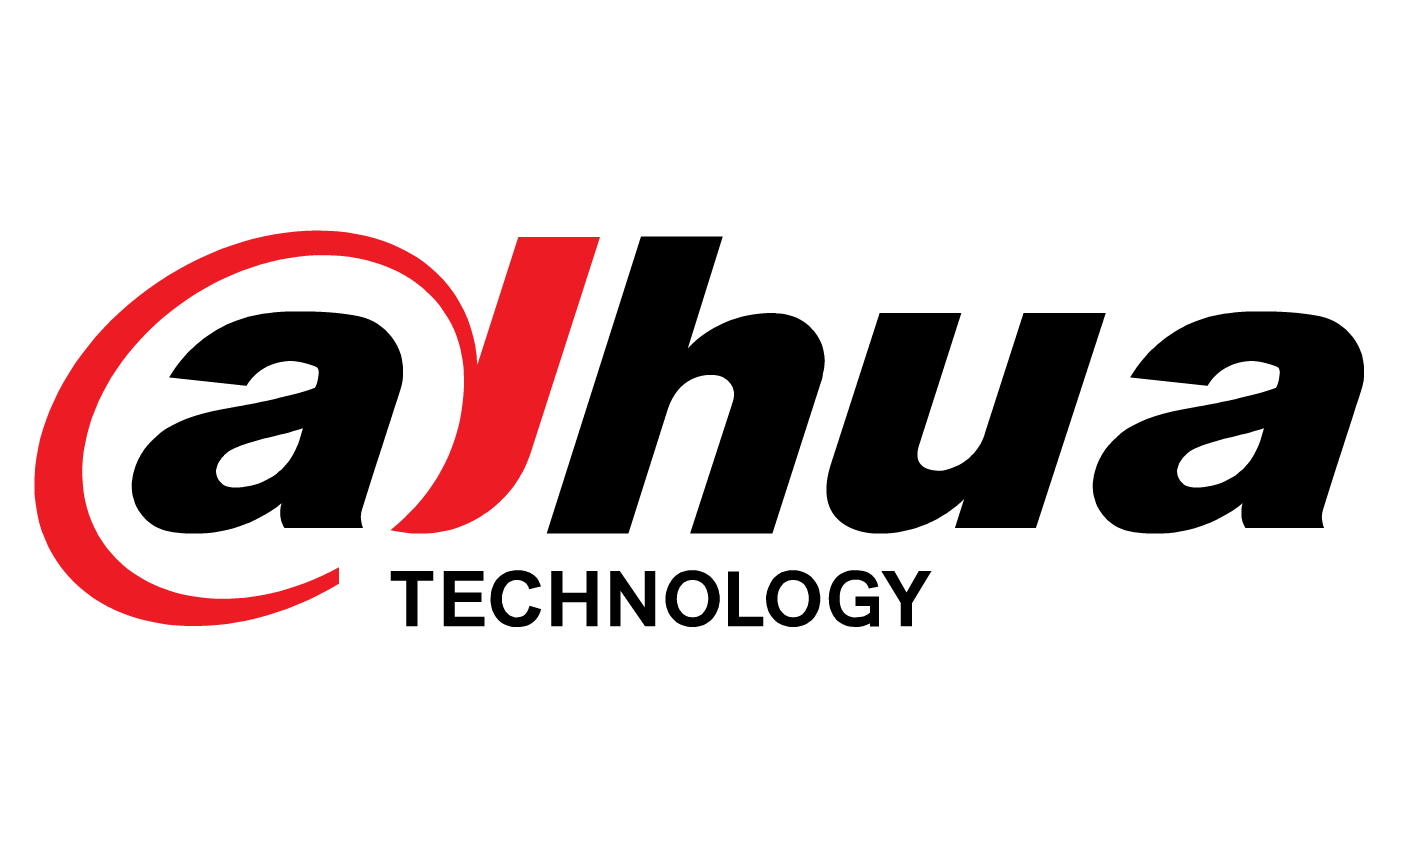 Dahua-LOGO_black_with_red_D_(1).png